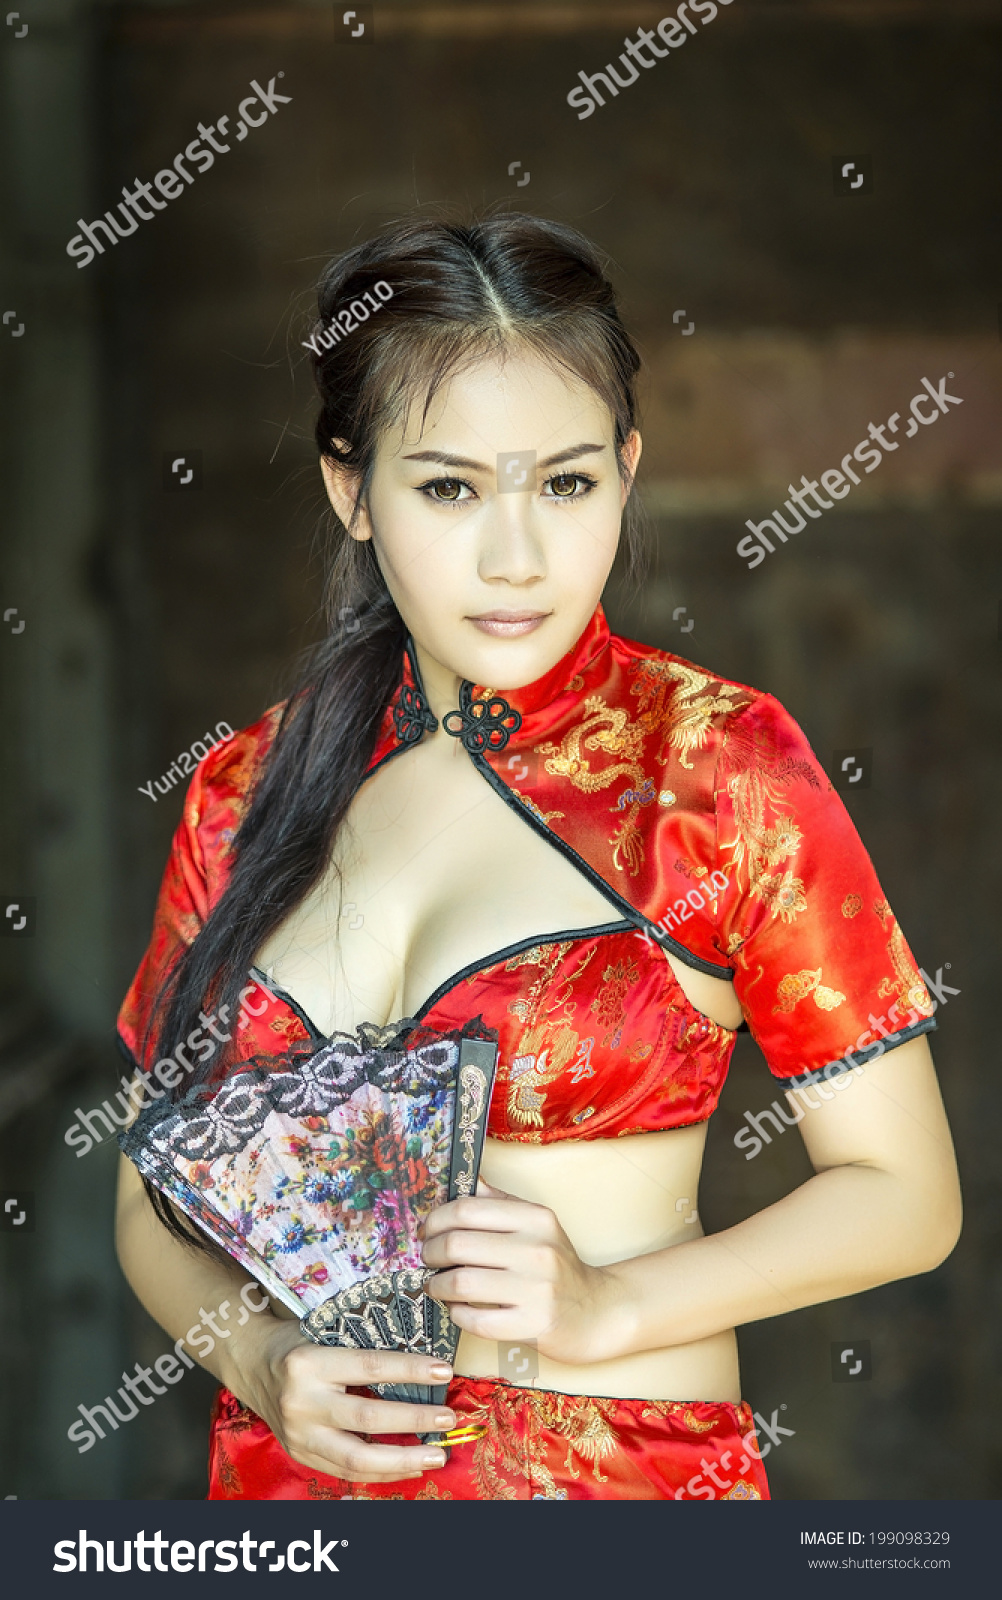 bryan mcneary share chinese woman sexy photos